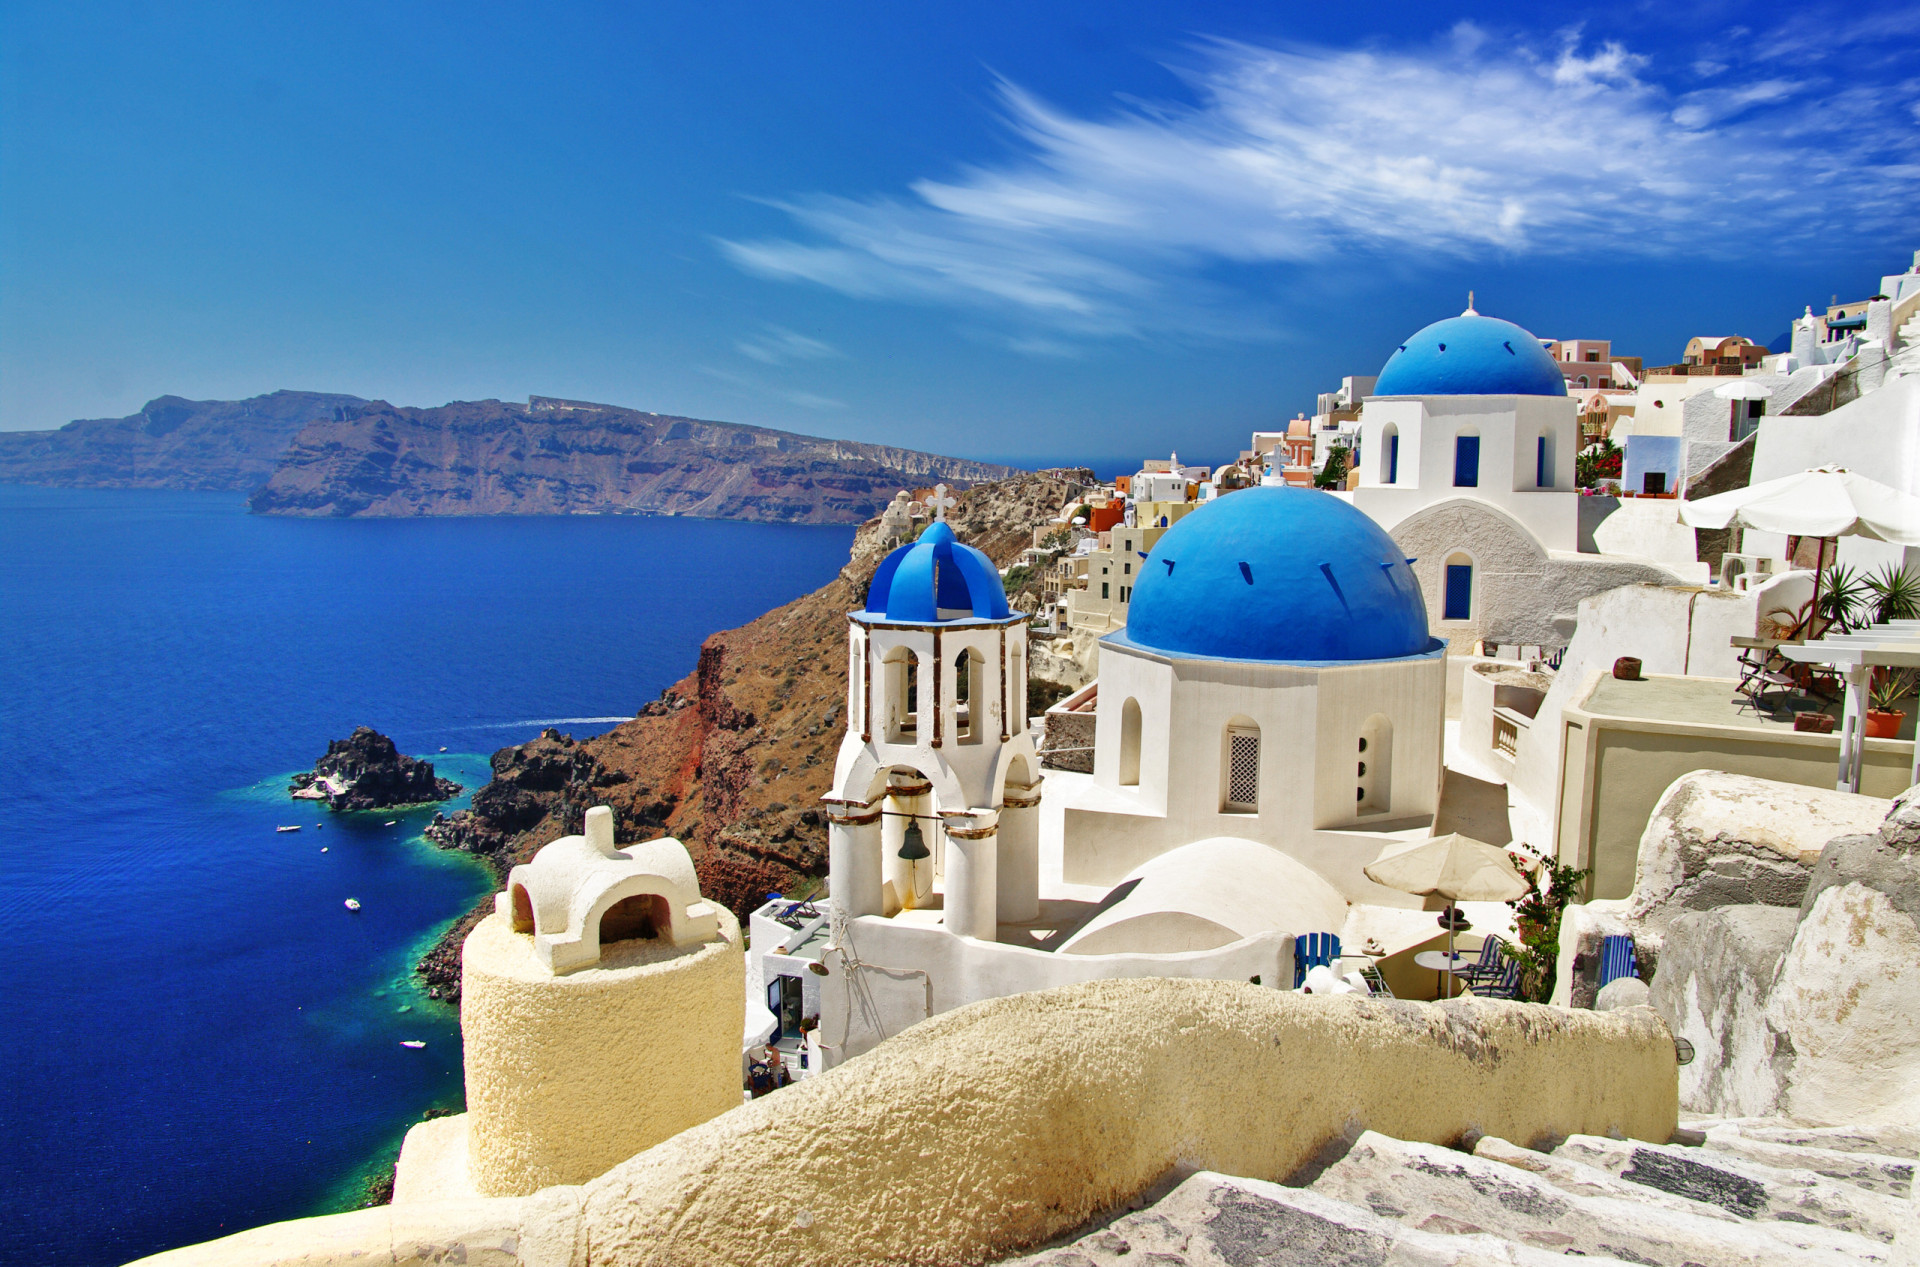 <p>The price you pay in Greece depends on the standard and size of your accommodation. It tends to be around €4 (US$4.36) per night.</p><p><a href="https://www.msn.com/en-ph/community/channel/vid-7xx8mnucu55yw63we9va2gwr7uihbxwc68fxqp25x6tg4ftibpra?cvid=94631541bc0f4f89bfd59158d696ad7e">Follow us and access great exclusive content every day</a></p>